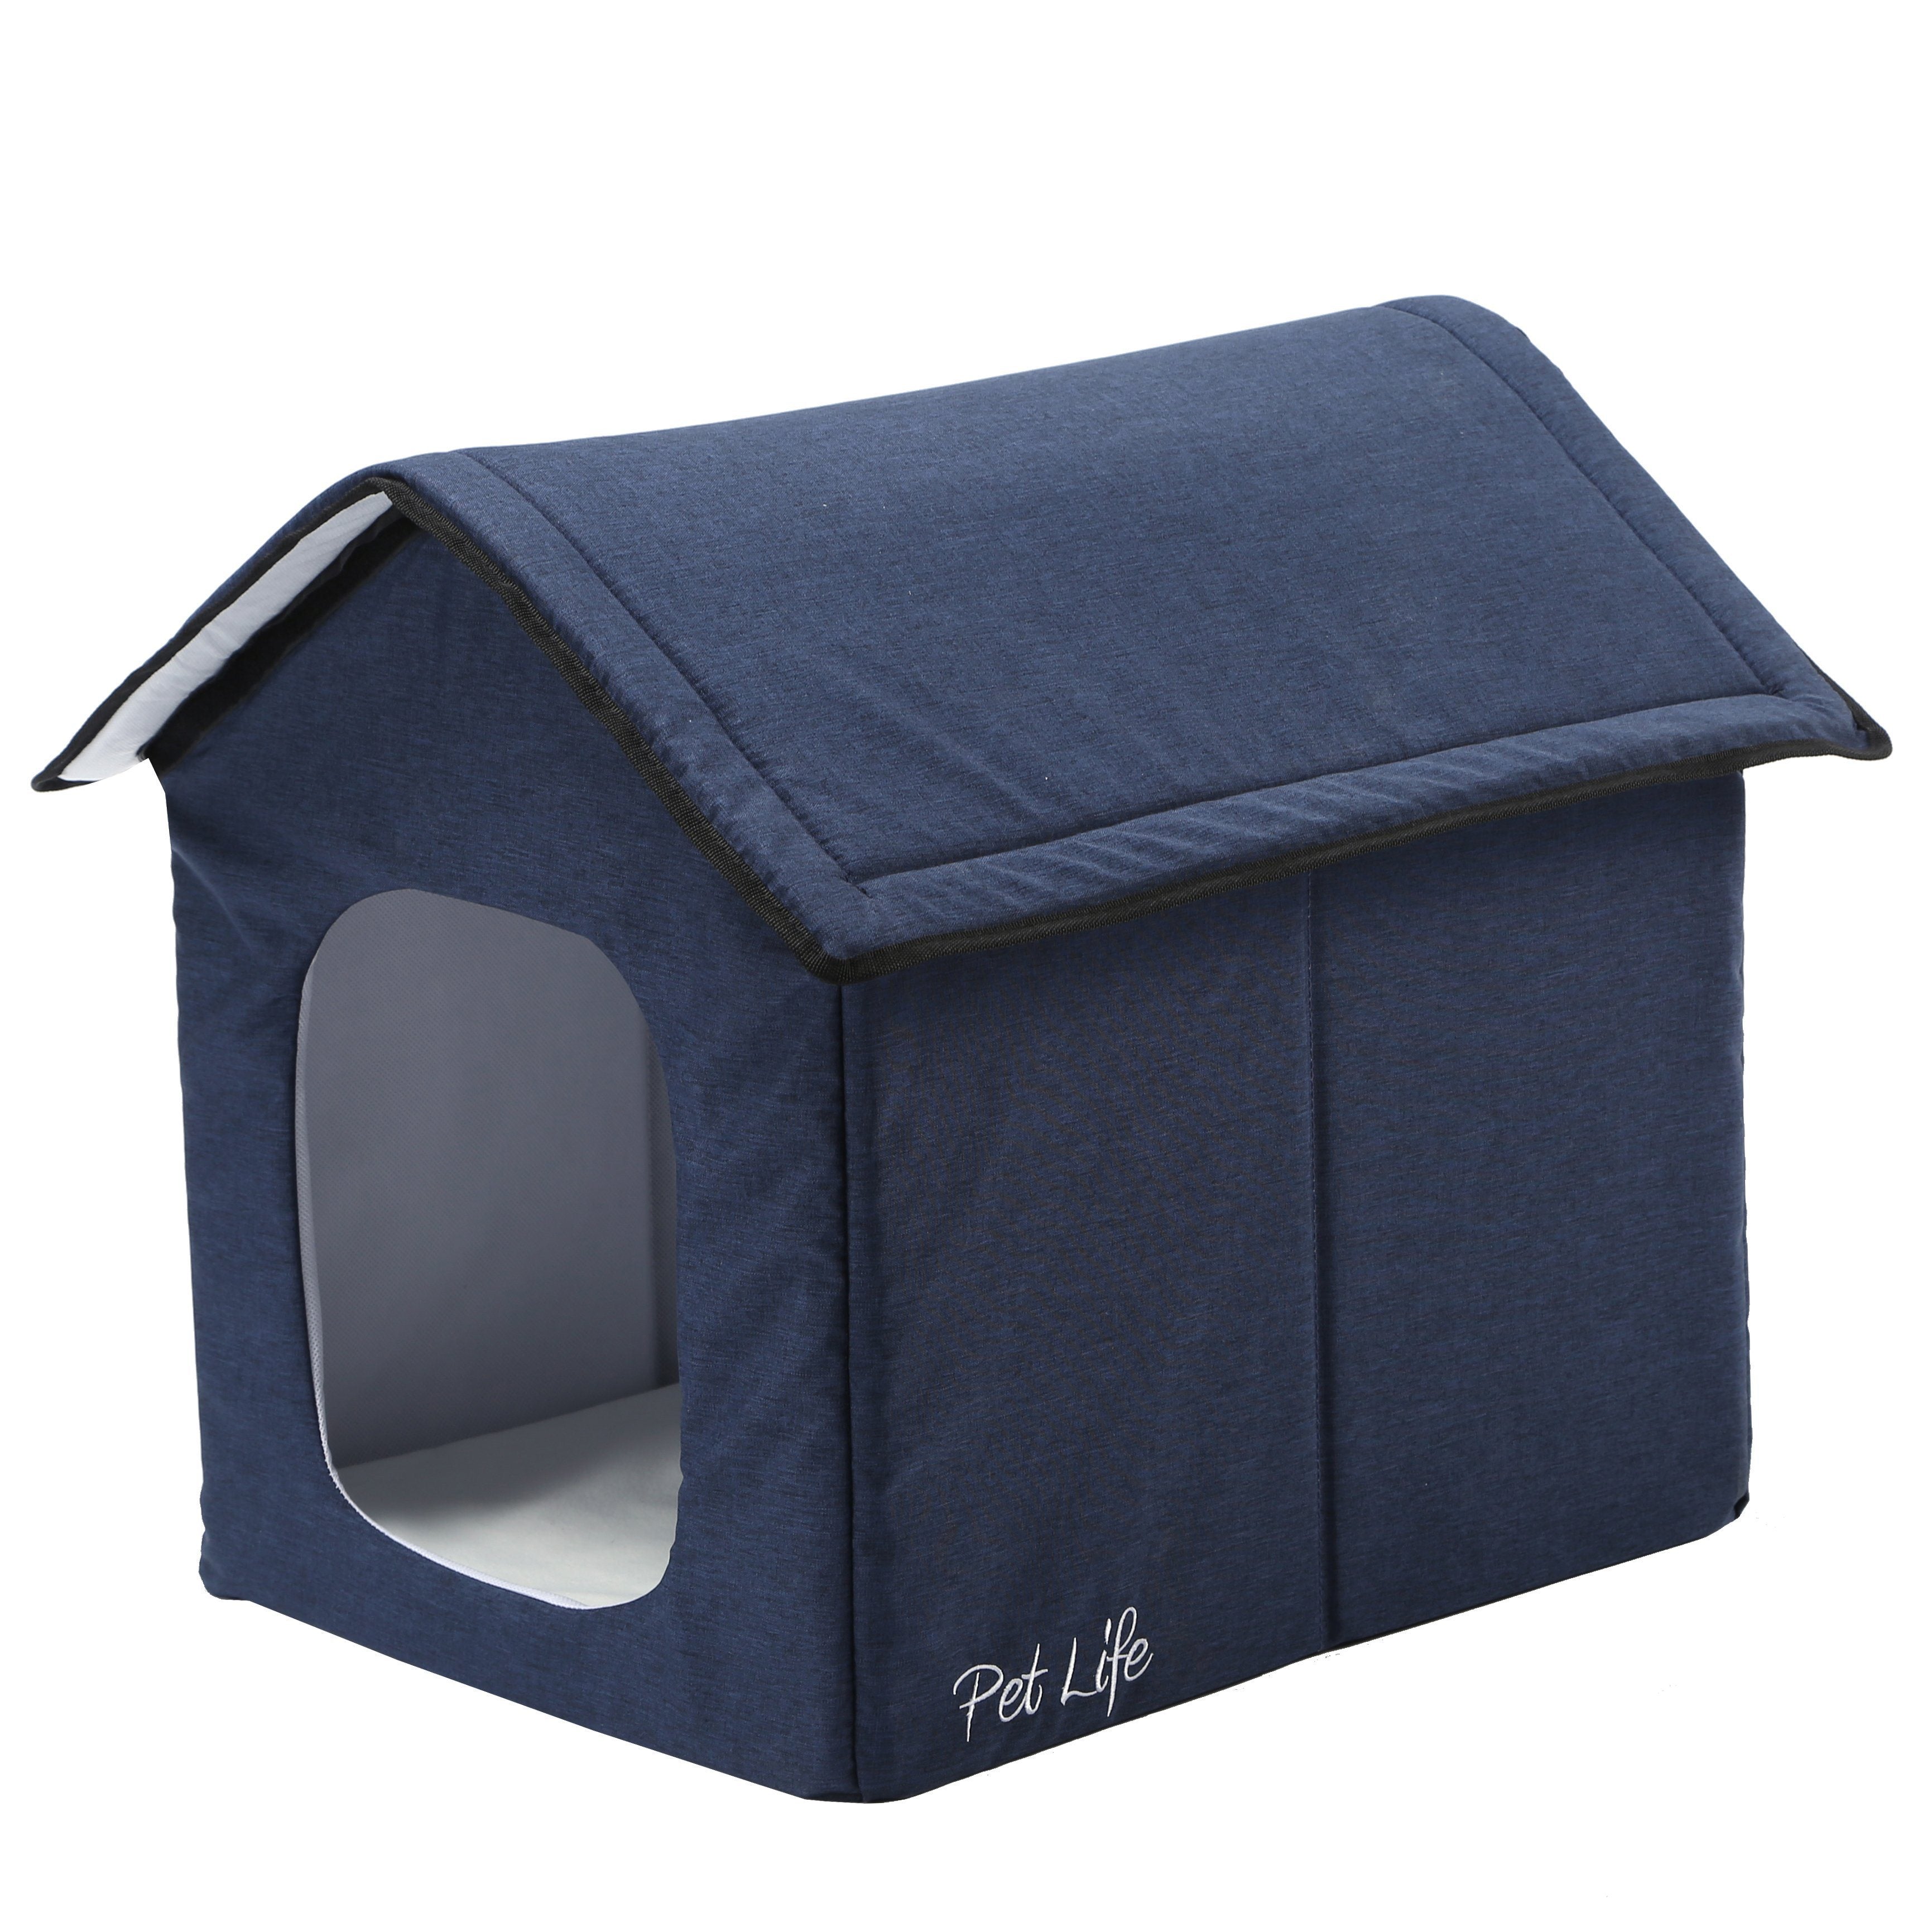 Pet Life 'Hush Puppy' Collapsible Electronic Heating and Cooling Smart Pet House Small Navy